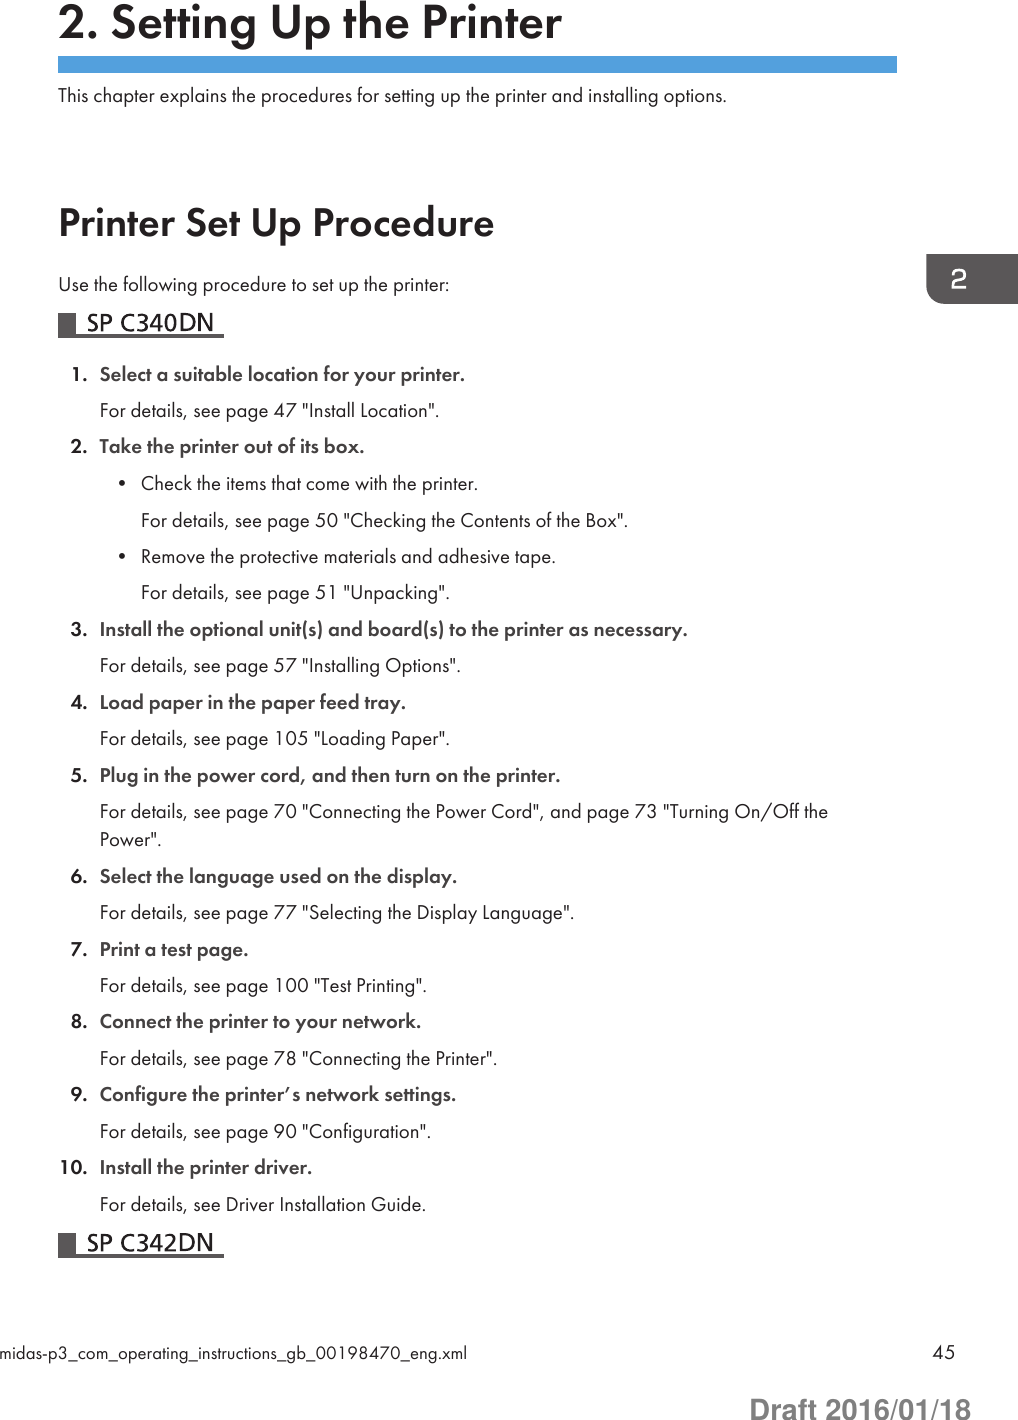 2. Setting Up the PrinterThis chapter explains the procedures for setting up the printer and installing options.Printer Set Up ProcedureUse the following procedure to set up the printer:1. Select a suitable location for your printer.For details, see page 47 &quot;Install Location&quot;.2. Take the printer out of its box.• Check the items that come with the printer.For details, see page 50 &quot;Checking the Contents of the Box&quot;.• Remove the protective materials and adhesive tape.For details, see page 51 &quot;Unpacking&quot;.3. Install the optional unit(s) and board(s) to the printer as necessary.For details, see page 57 &quot;Installing Options&quot;.4. Load paper in the paper feed tray.For details, see page 105 &quot;Loading Paper&quot;.5. Plug in the power cord, and then turn on the printer.For details, see page 70 &quot;Connecting the Power Cord&quot;, and page 73 &quot;Turning On/Off thePower&quot;.6. Select the language used on the display.For details, see page 77 &quot;Selecting the Display Language&quot;.7. Print a test page.For details, see page 100 &quot;Test Printing&quot;.8. Connect the printer to your network.For details, see page 78 &quot;Connecting the Printer&quot;.9. Configure the printer’s network settings.For details, see page 90 &quot;Configuration&quot;.10. Install the printer driver.For details, see Driver Installation Guide.midas-p3_com_operating_instructions_gb_00198470_eng.xml 45Draft 2016/01/18